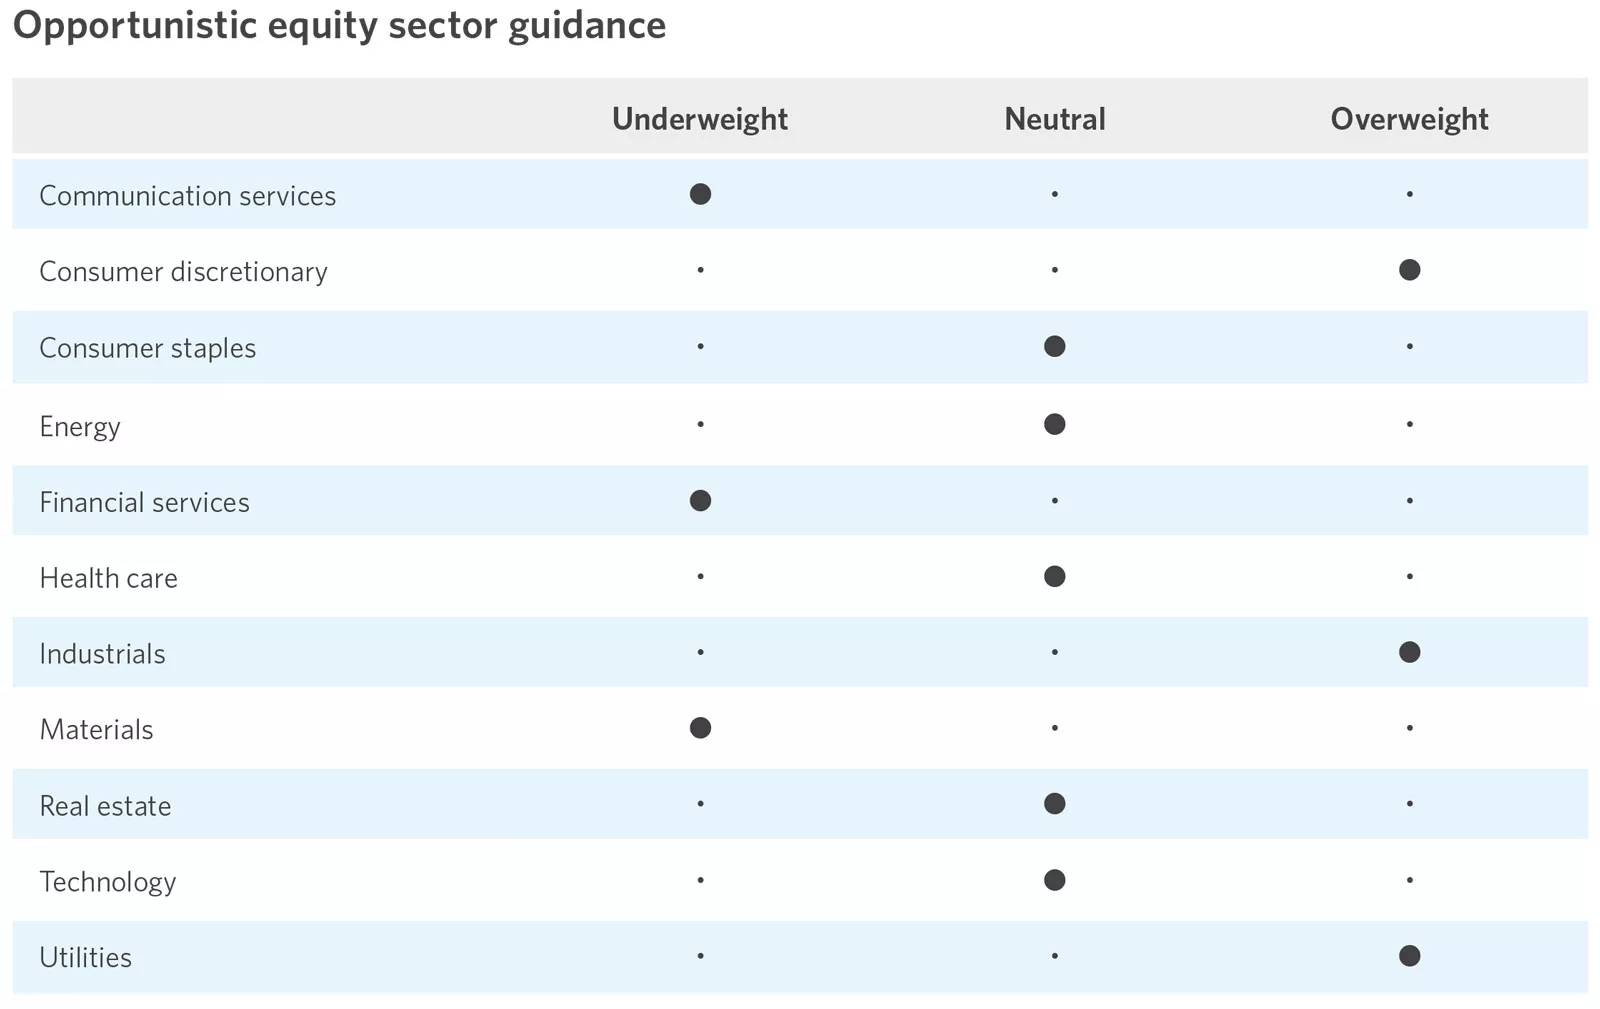  Chart showing Opportunistic equity sector guidance
